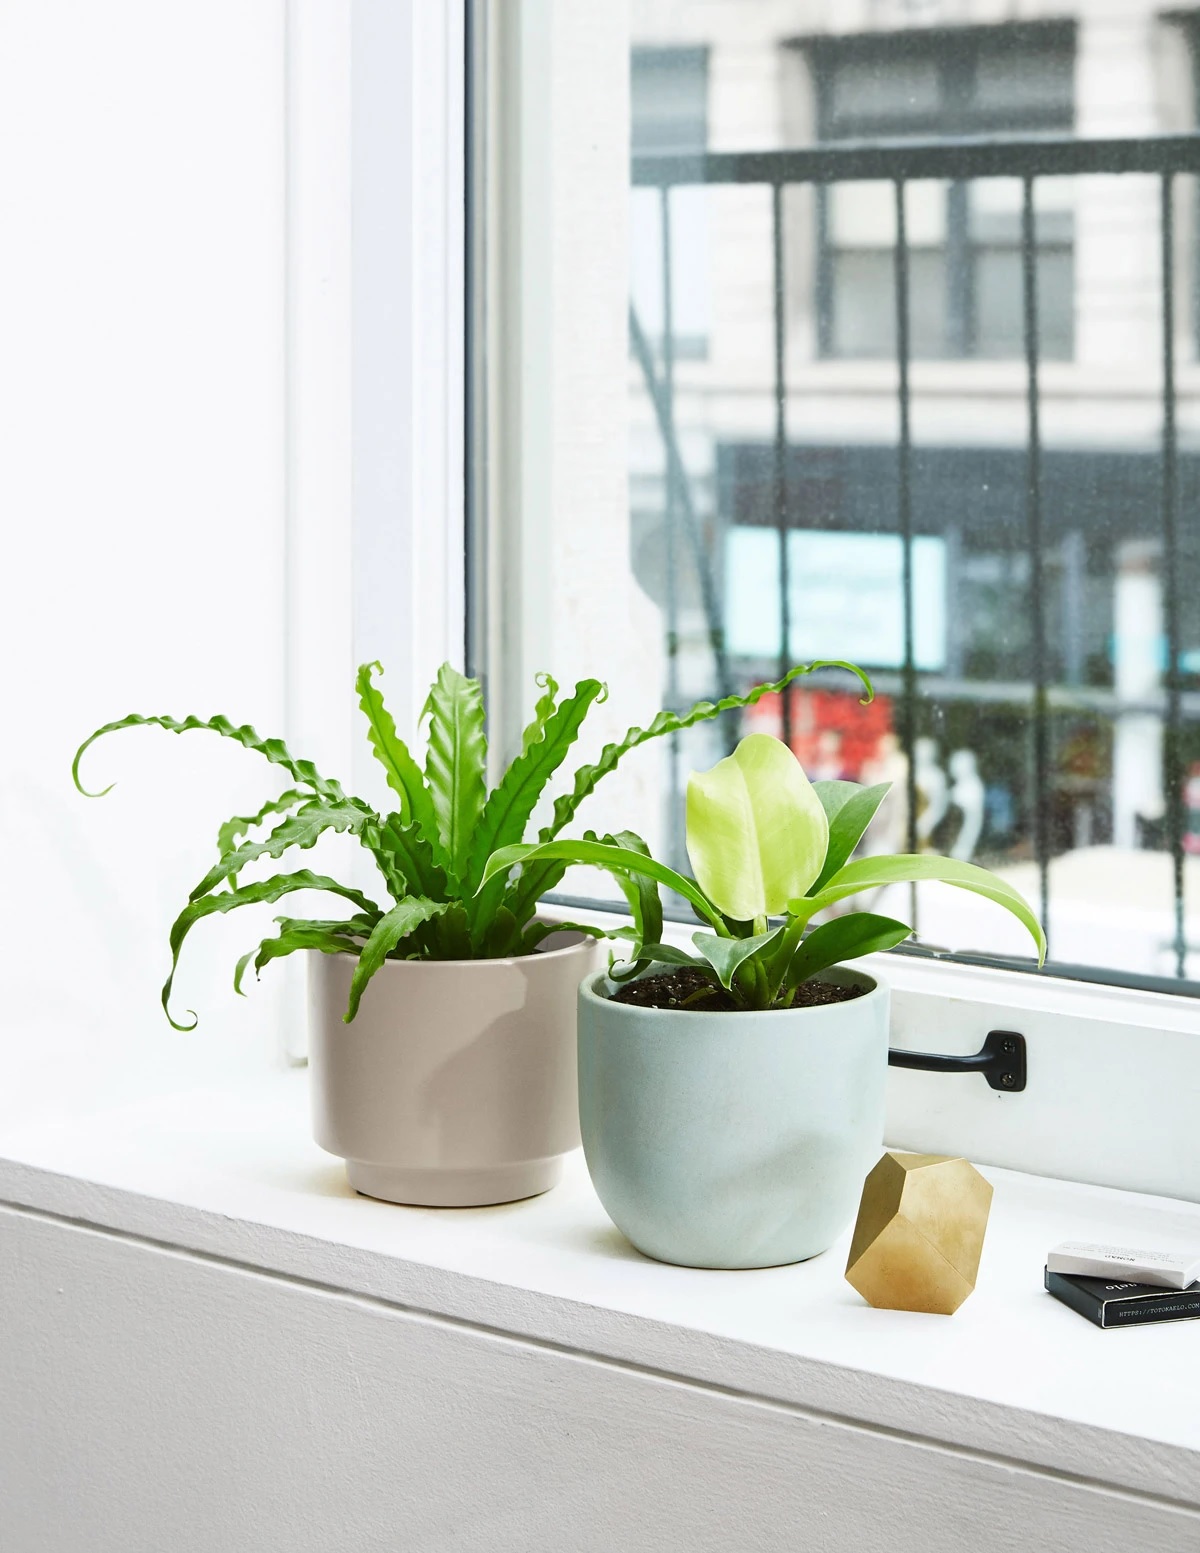 Plants by the windows